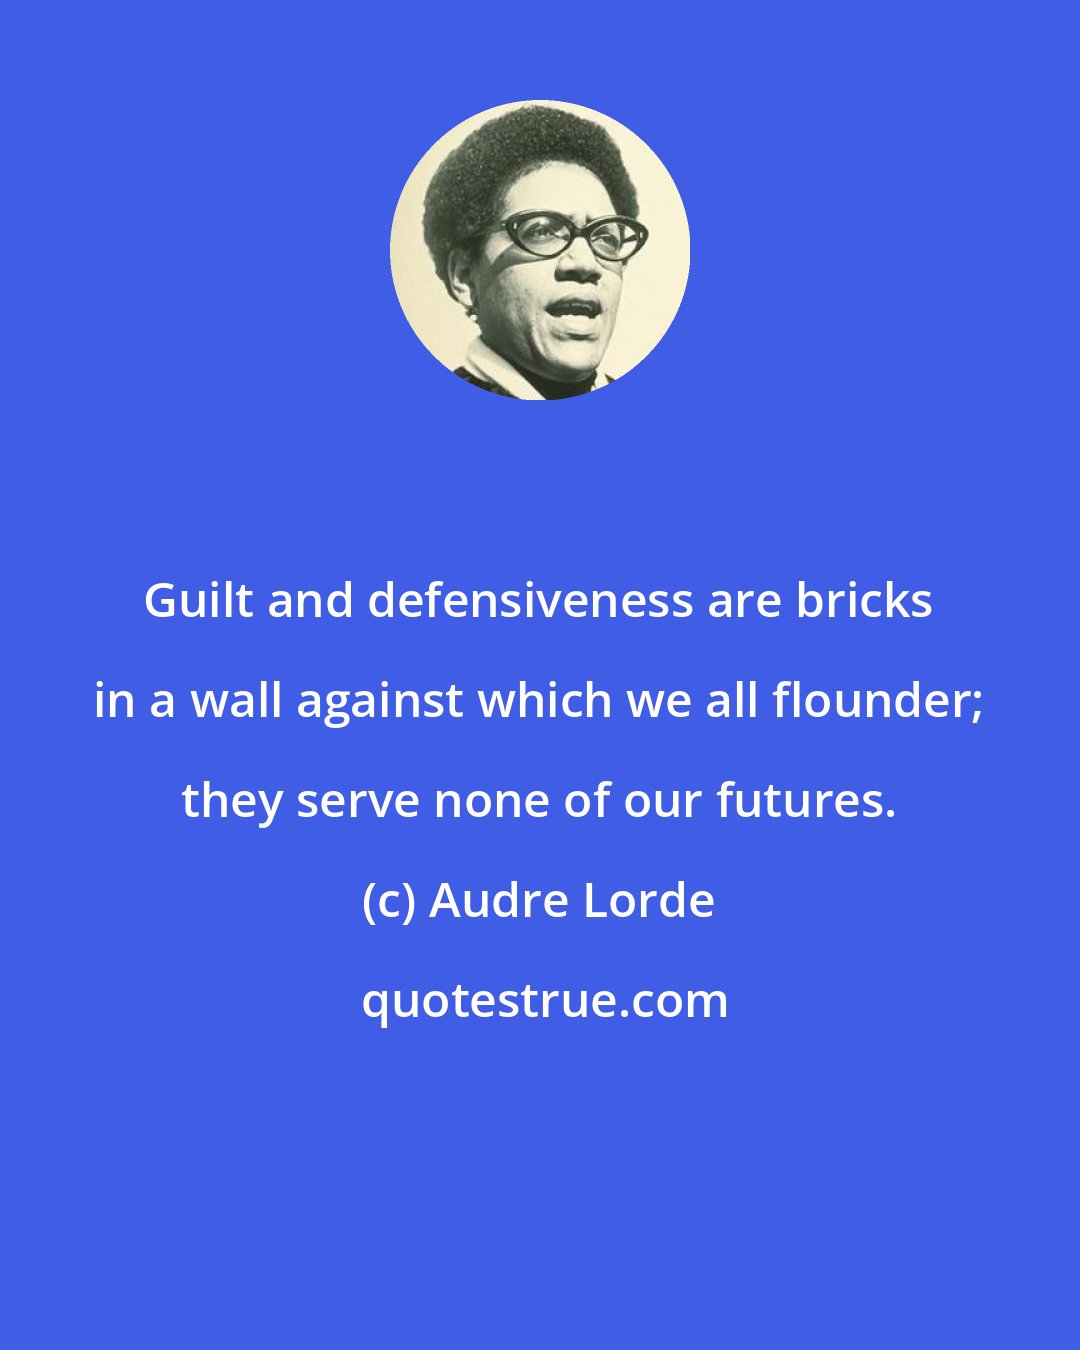 Audre Lorde: Guilt and defensiveness are bricks in a wall against which we all flounder; they serve none of our futures.